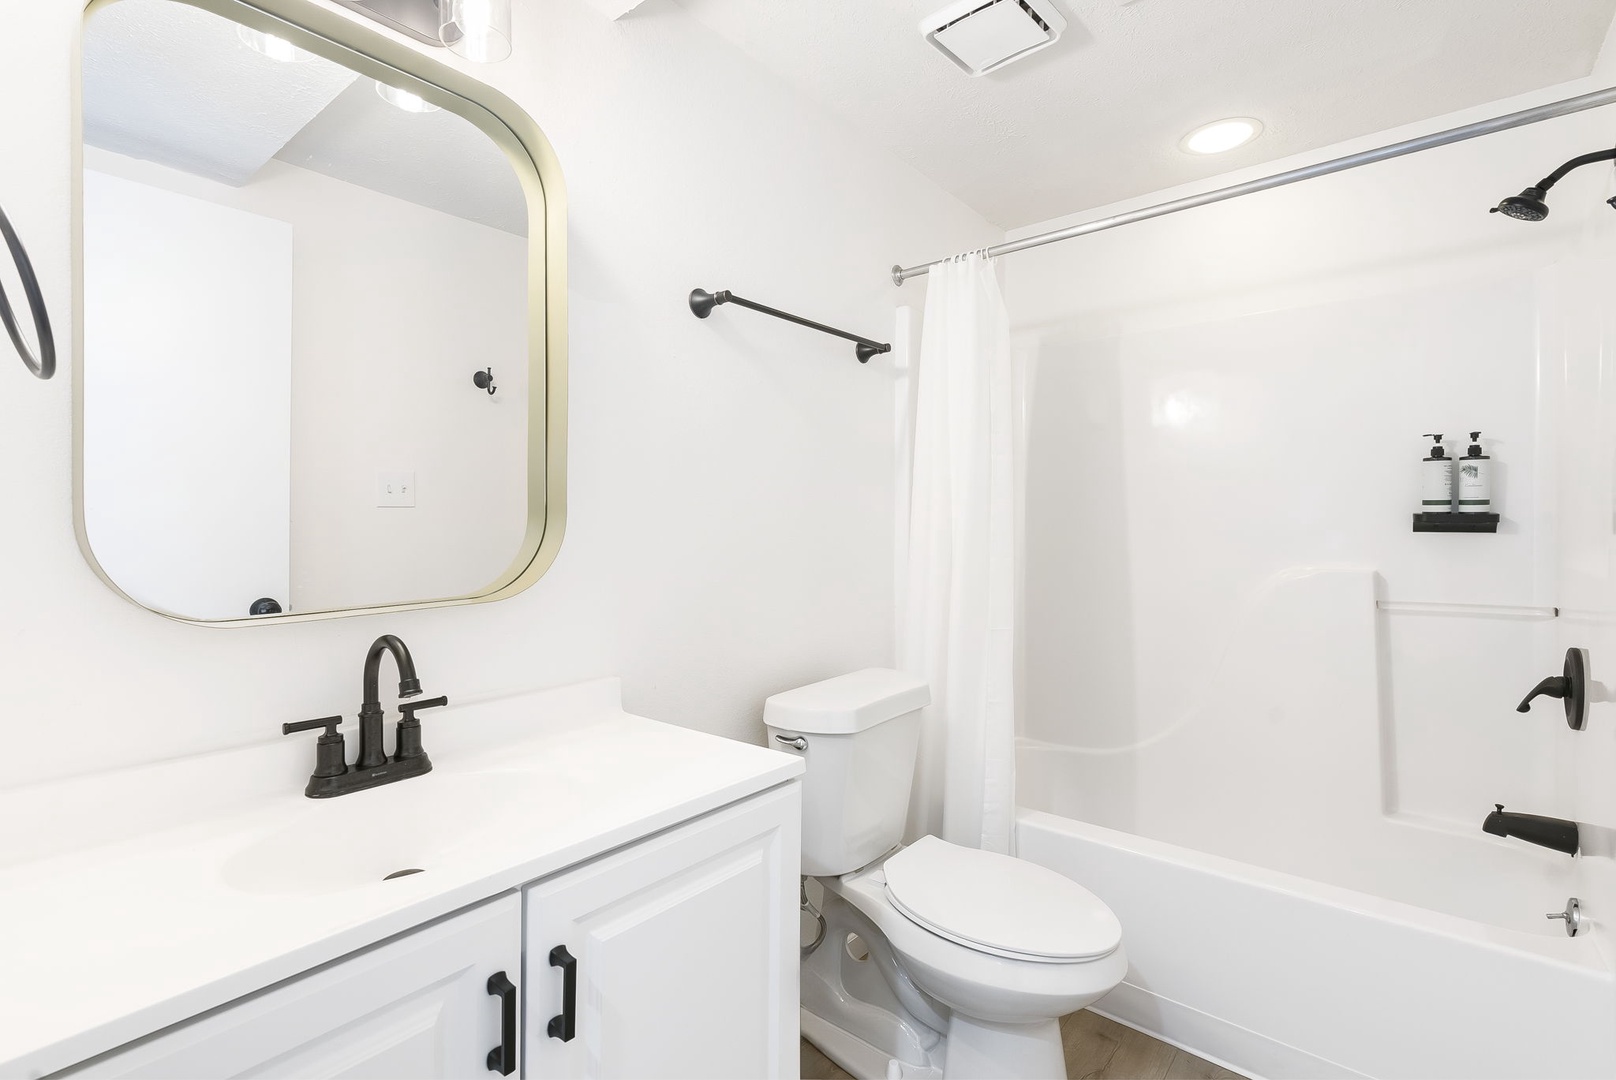 Unit 45: This 1st floor full bath includes a single vanity & shower/tub combo